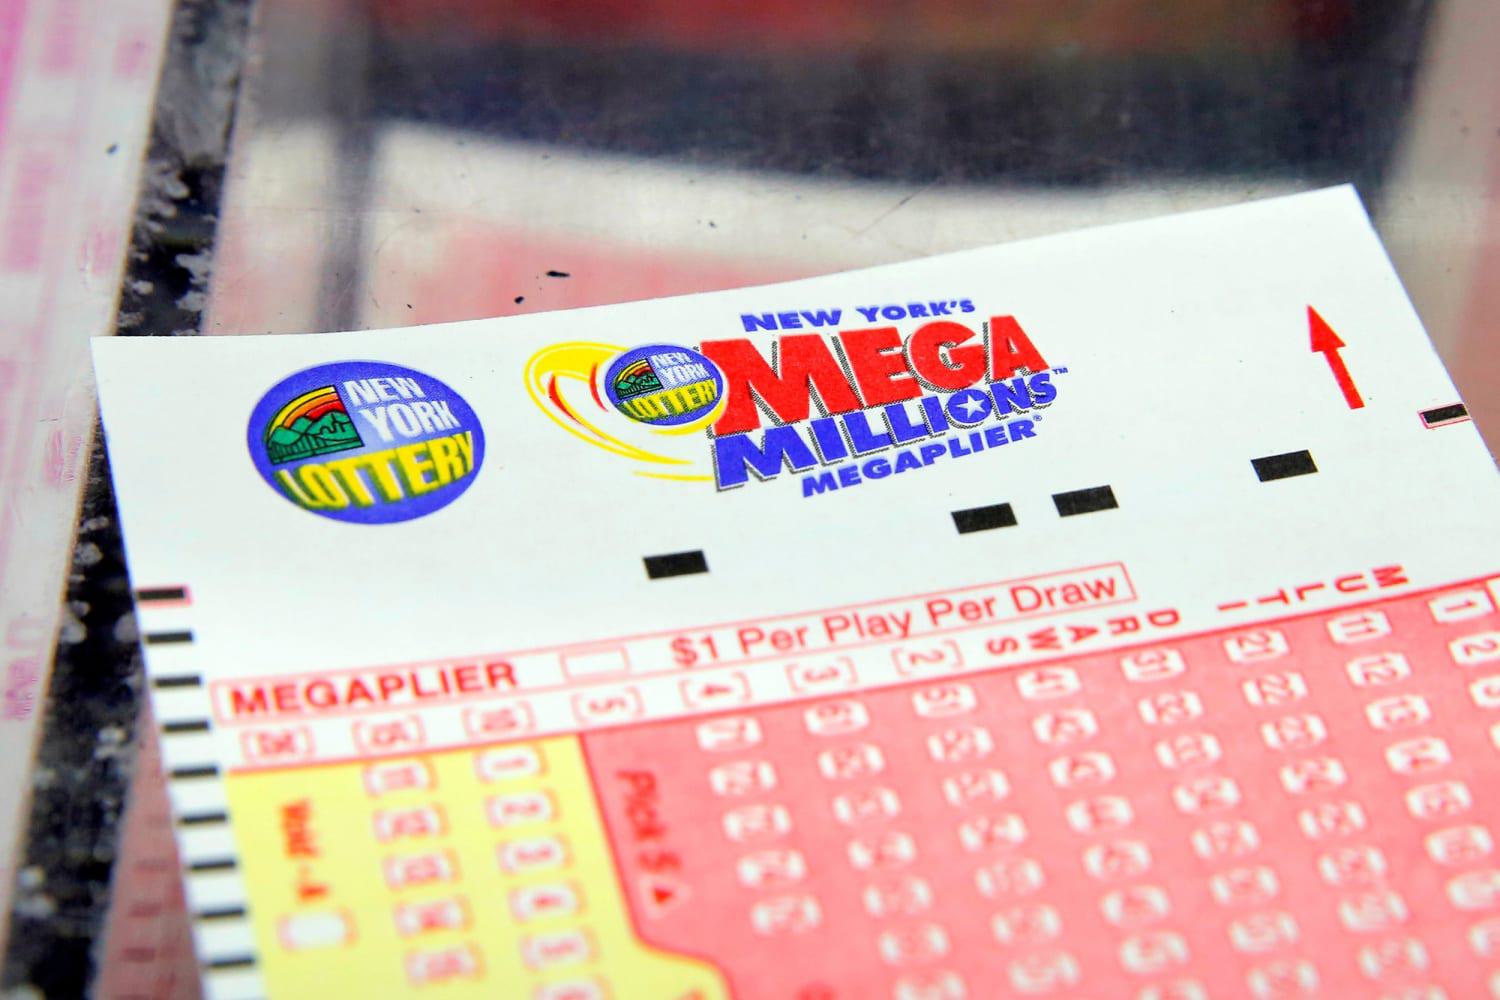 Mega Millions Jackpot of $36 Million Unclaimed in Florida - Prize Funds Now for Education